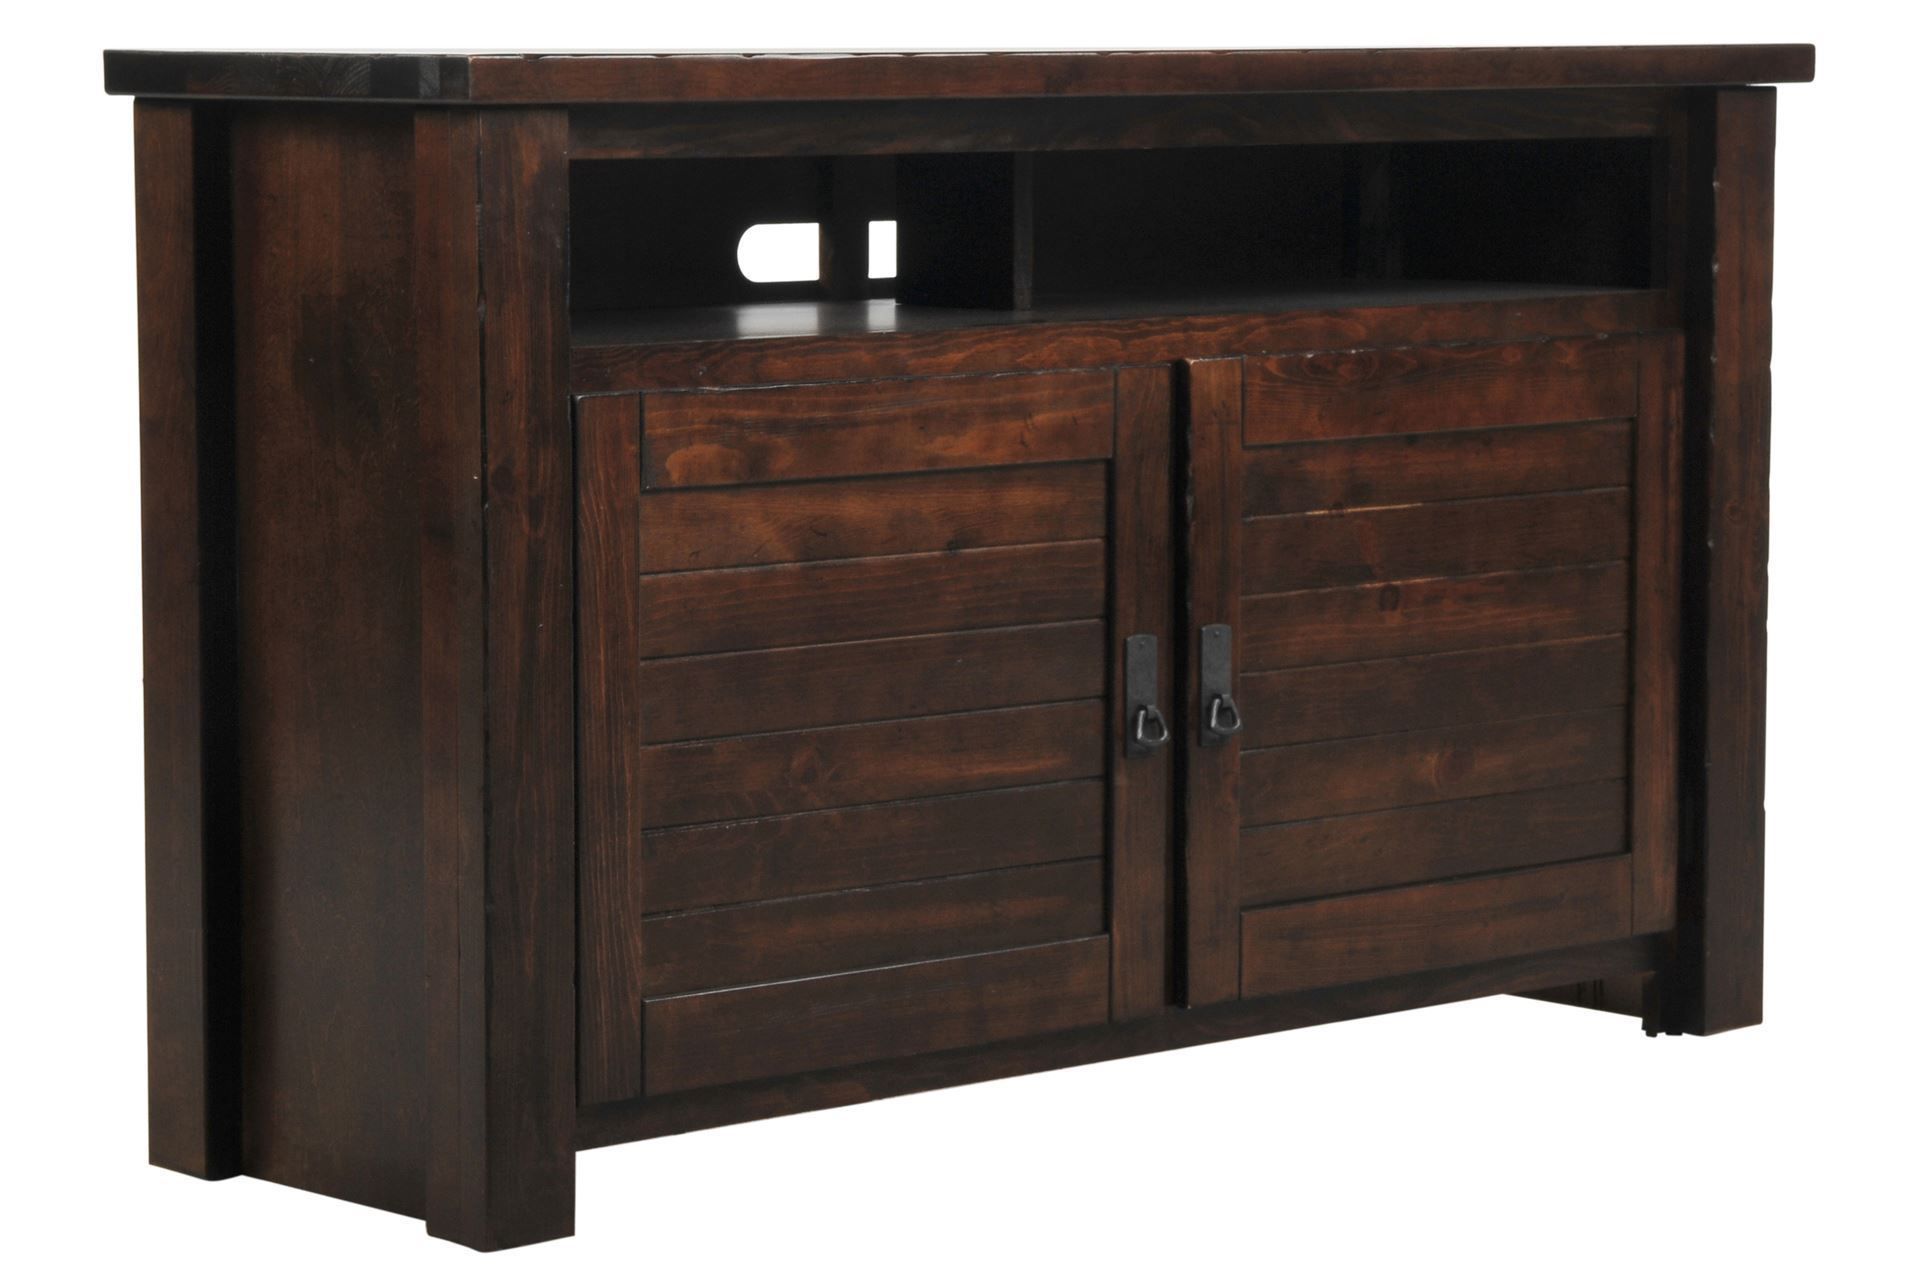 Canyon 54 Inch Tv Stand | Media | Living Spaces Furniture, Living Throughout Canyon 54 Inch Tv Stands (View 3 of 30)